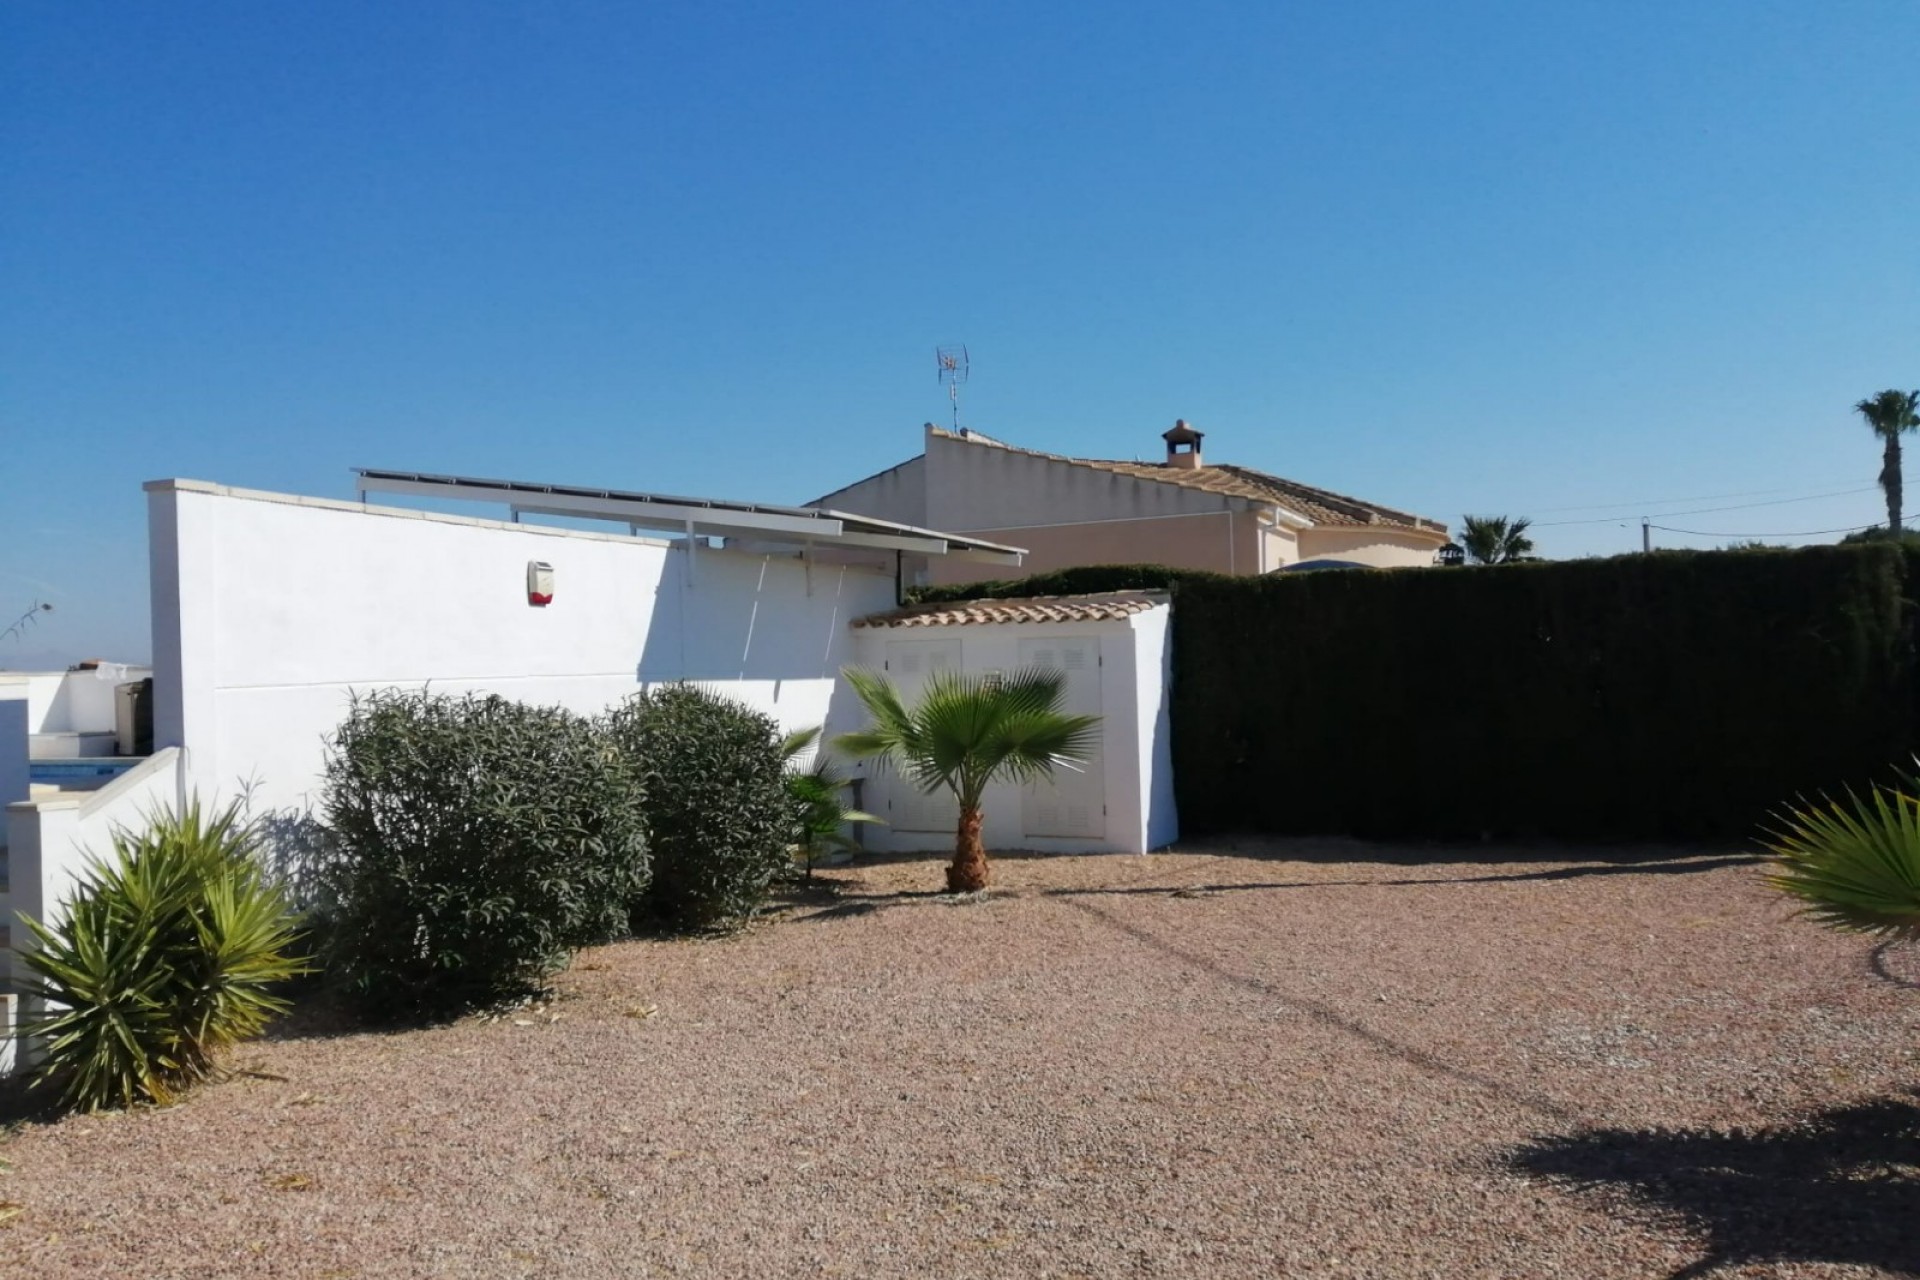 Reventa - Country House -
Dolores